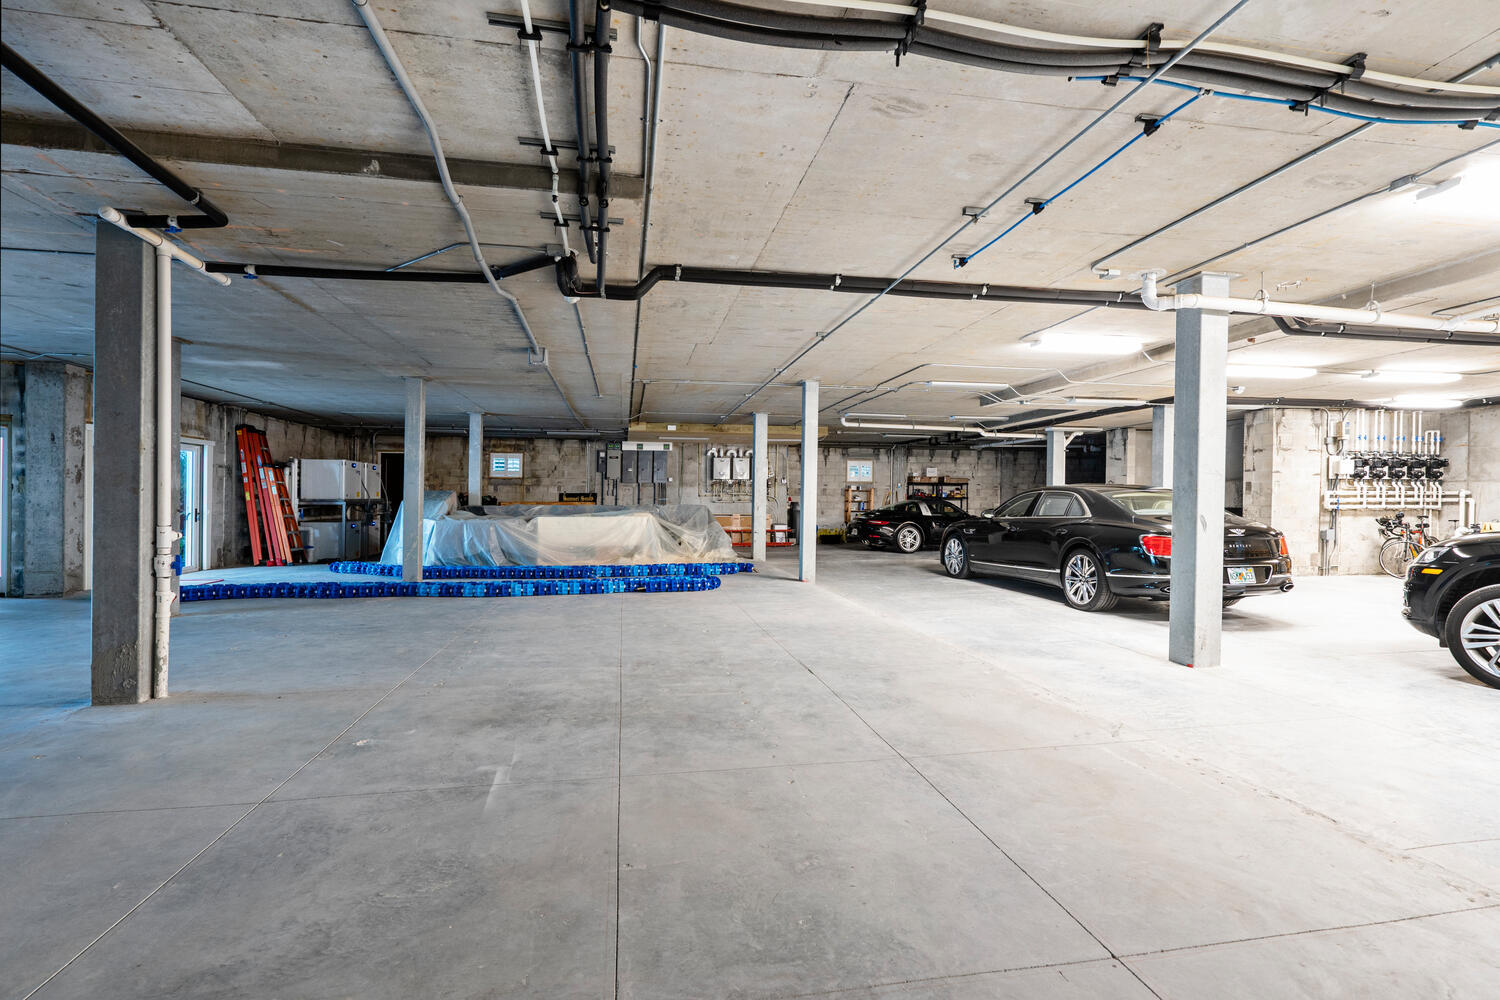 Courtesy. The listing at 1900 Casey Key Road includes a garage with room for at least 10 cars.